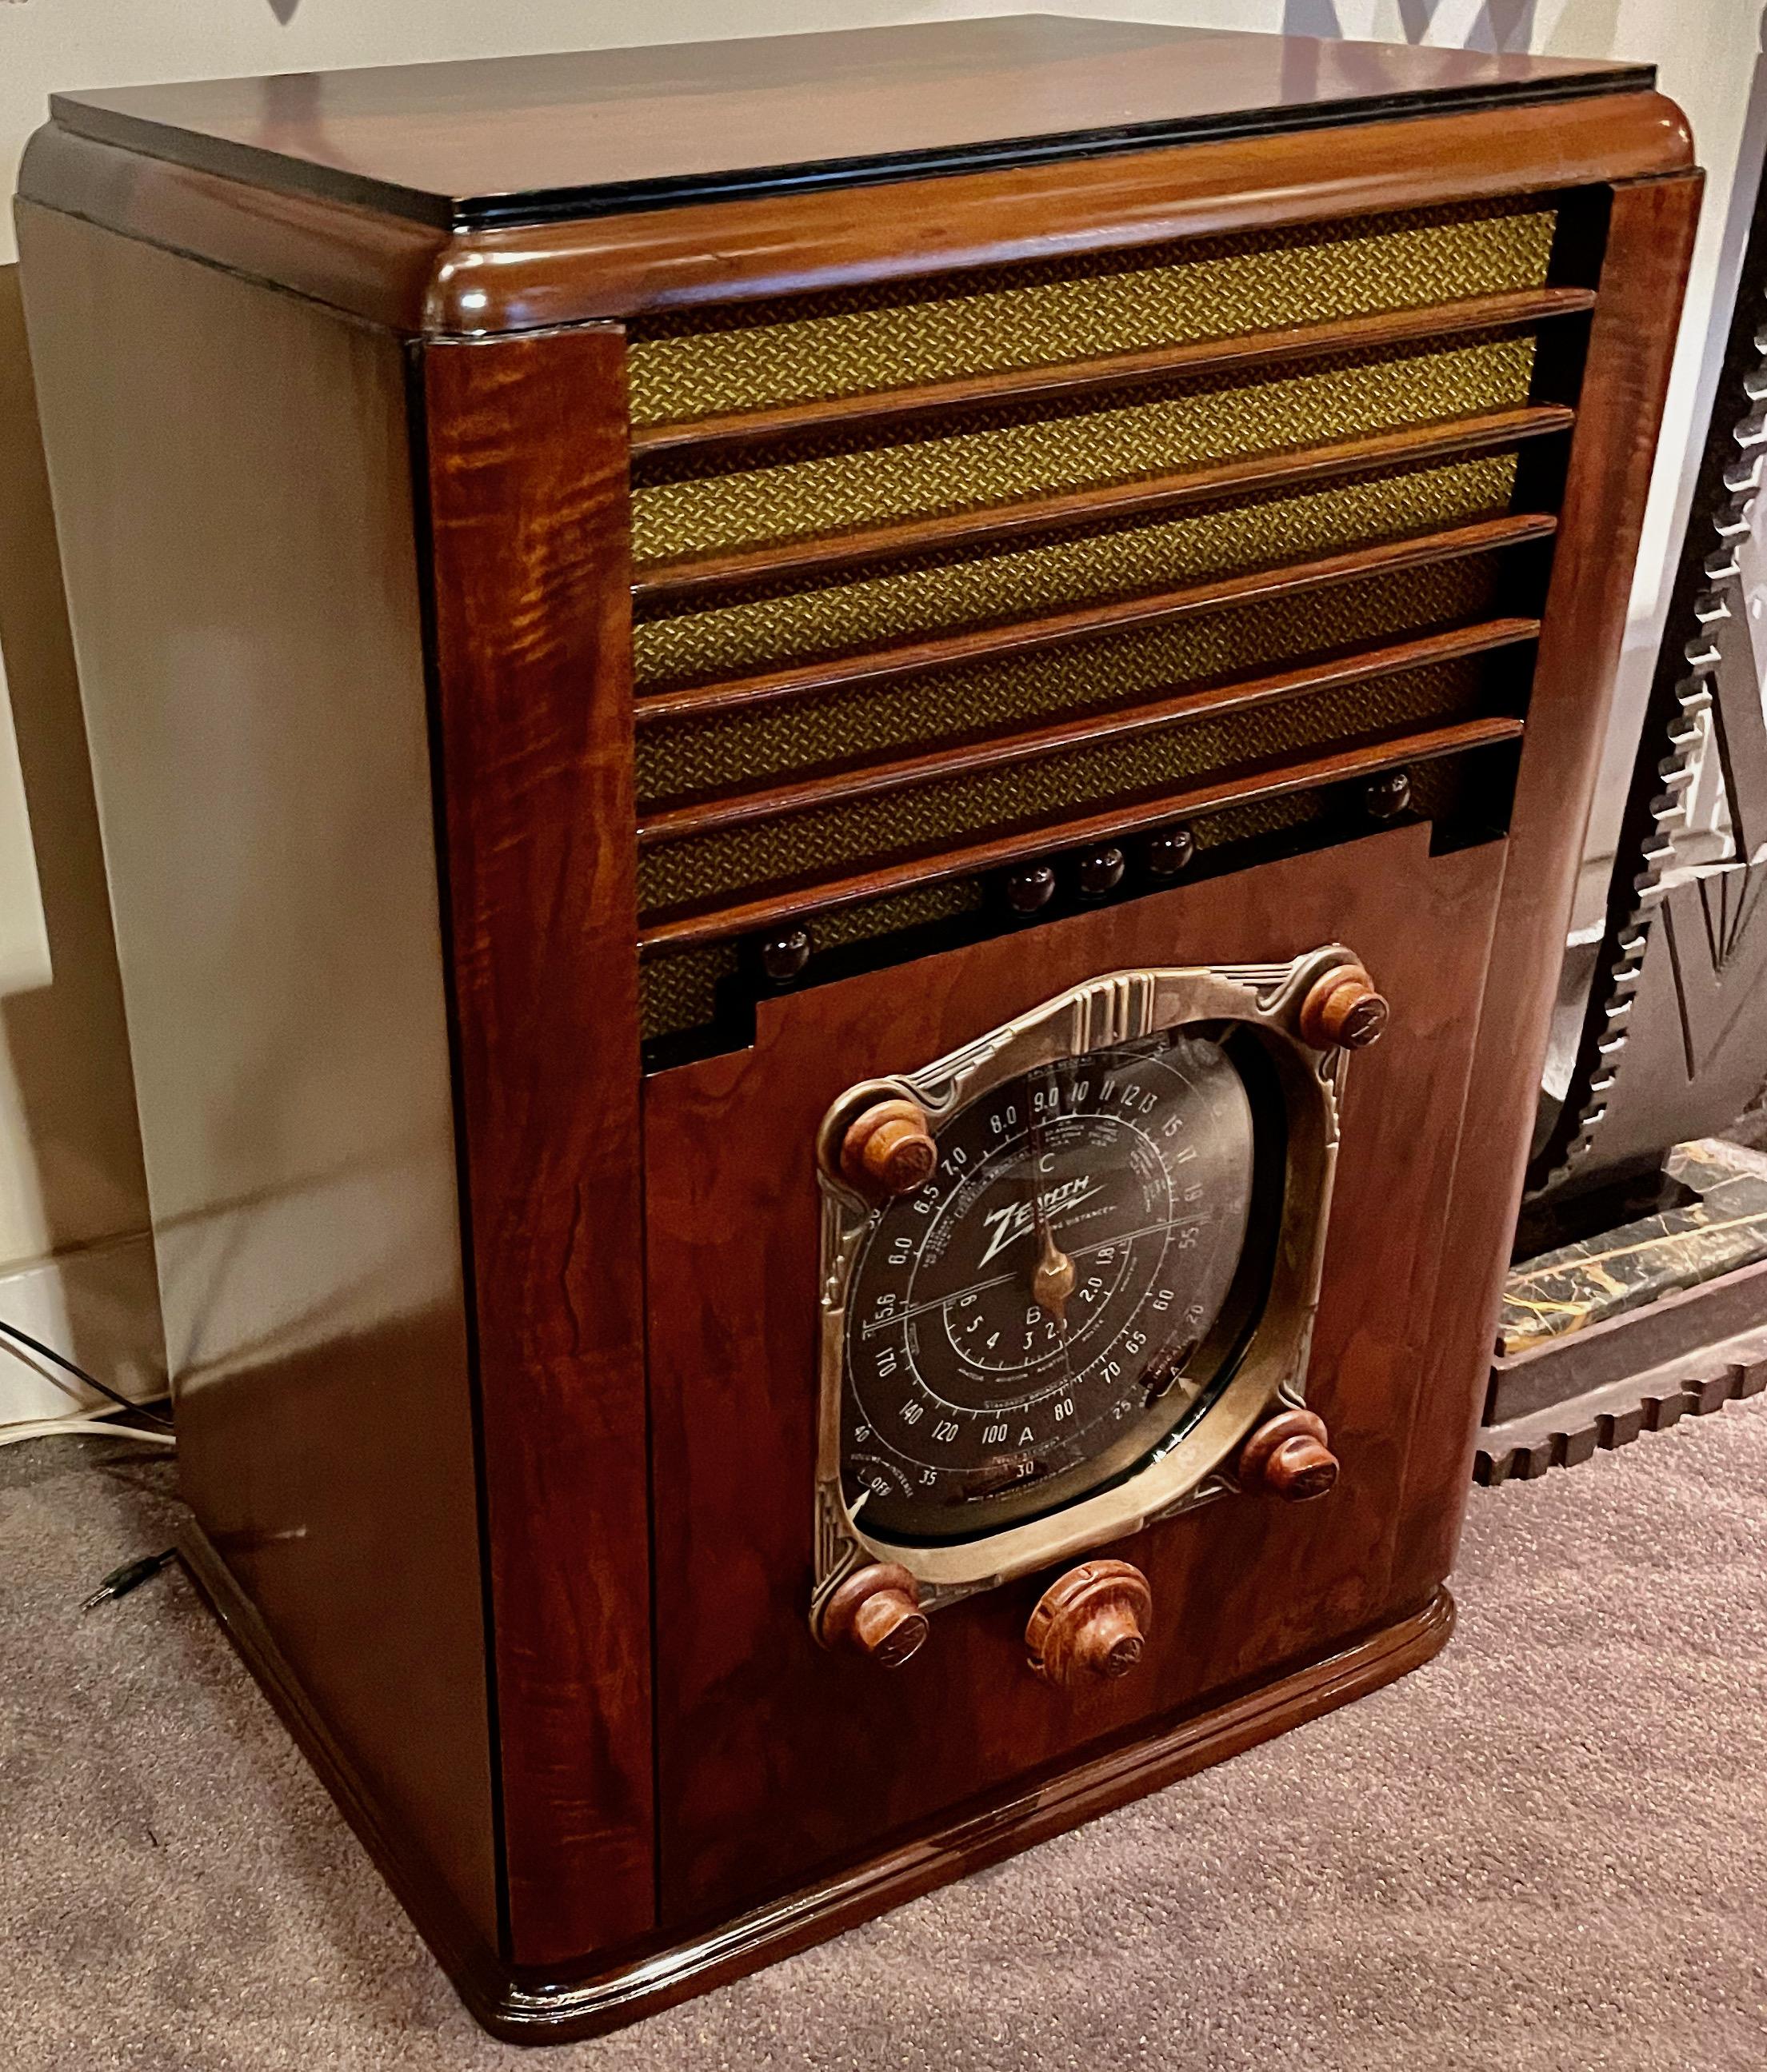 The Art Deco Zenith six-tube large broadcast/short wave radio will be a highlight of any vintage radio collection. It retains the original rare and perfect model 49-117 speaker, the original wooden knobs, bezel, dial glass, and dial scale, all in